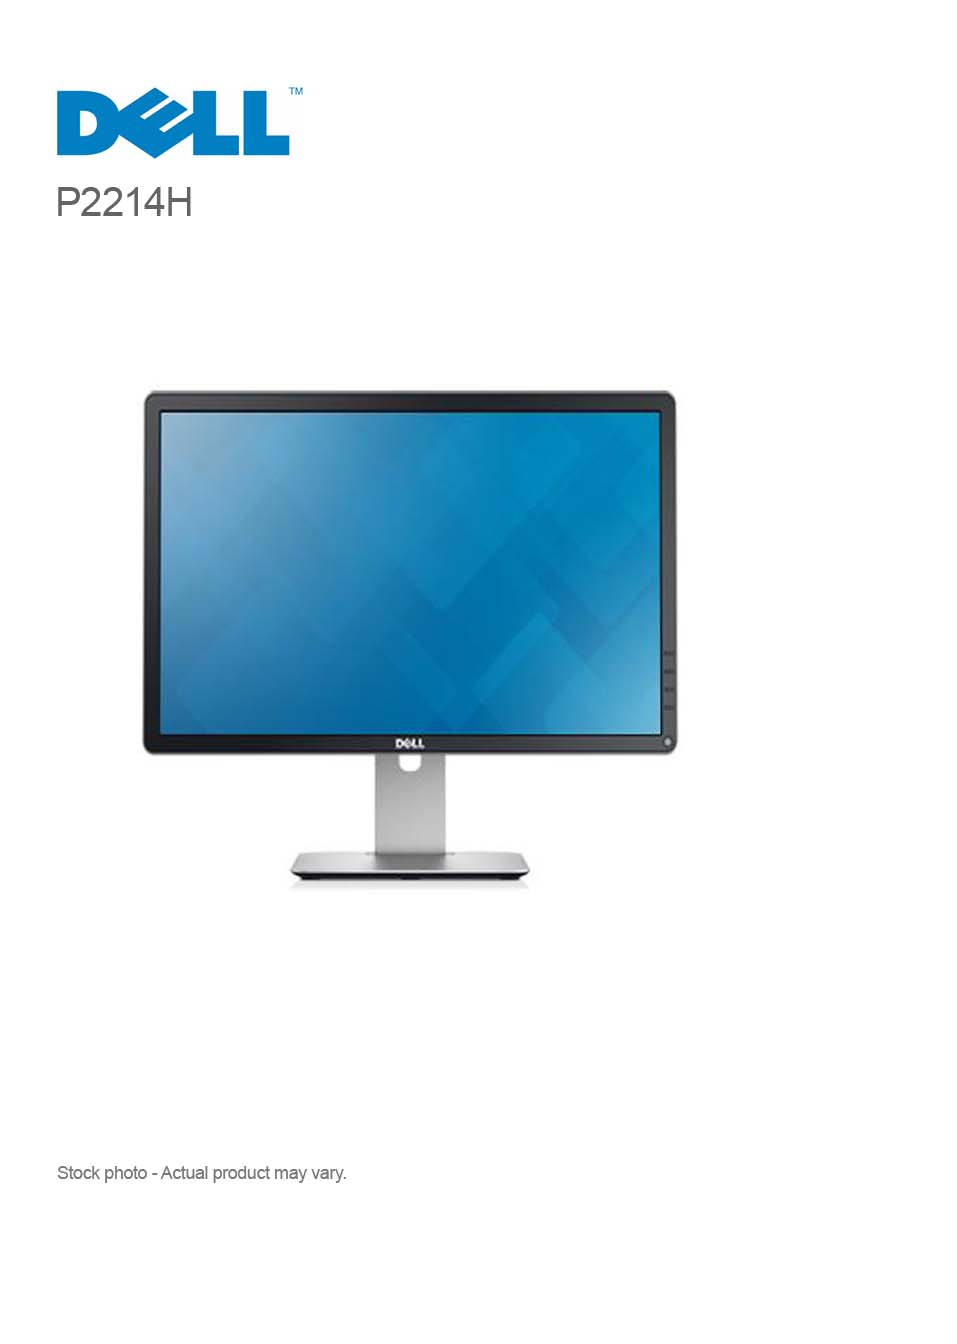 Dell Professional P2214h 22 Led Monitor Full Hd 19 1080 Compupoint